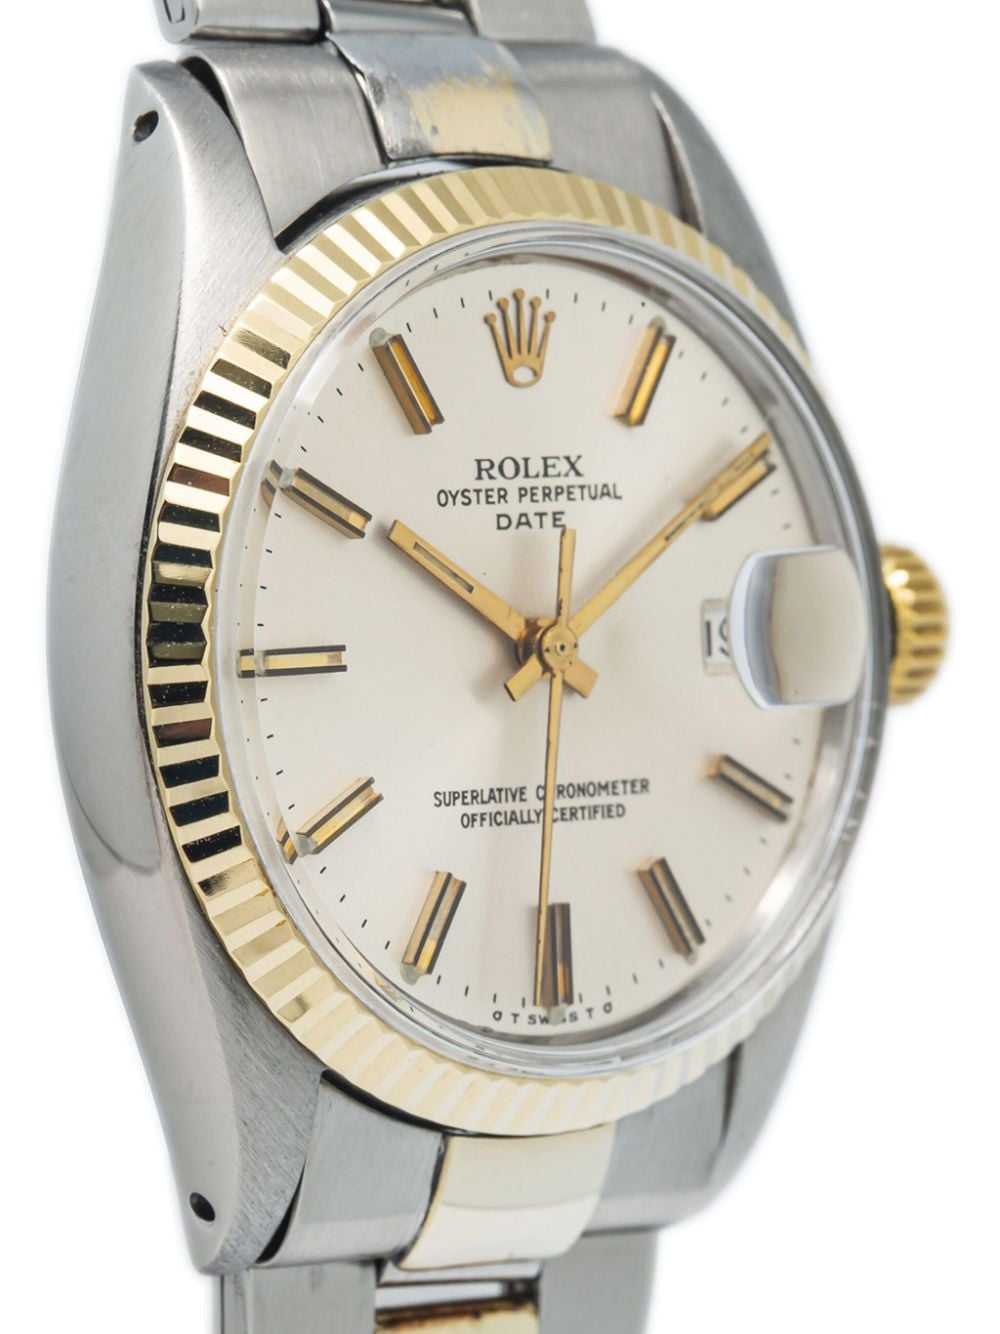 Rolex pre-owned Oyster Perpetual Date 34mm - Gold - image 3